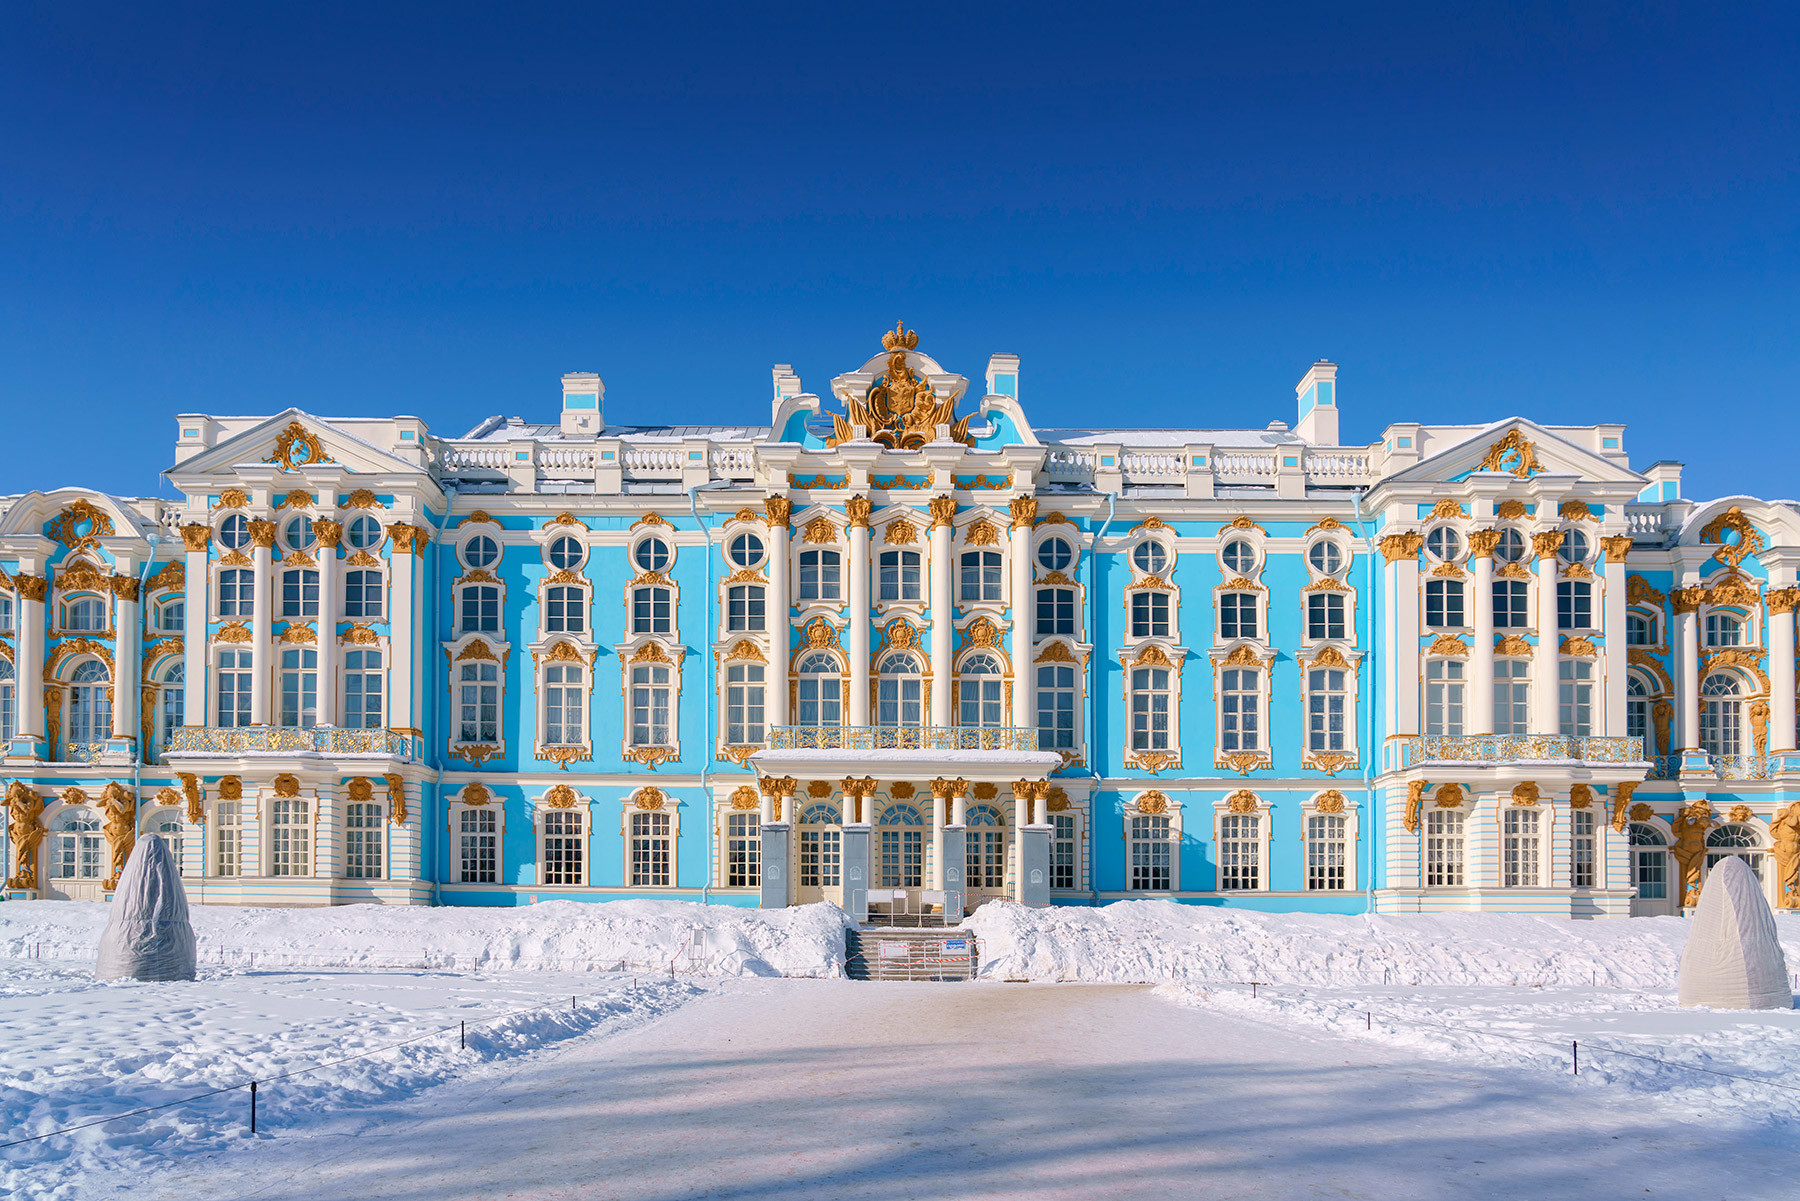 100 most beautiful places in Russia – the ultimate list - Russia Beyond